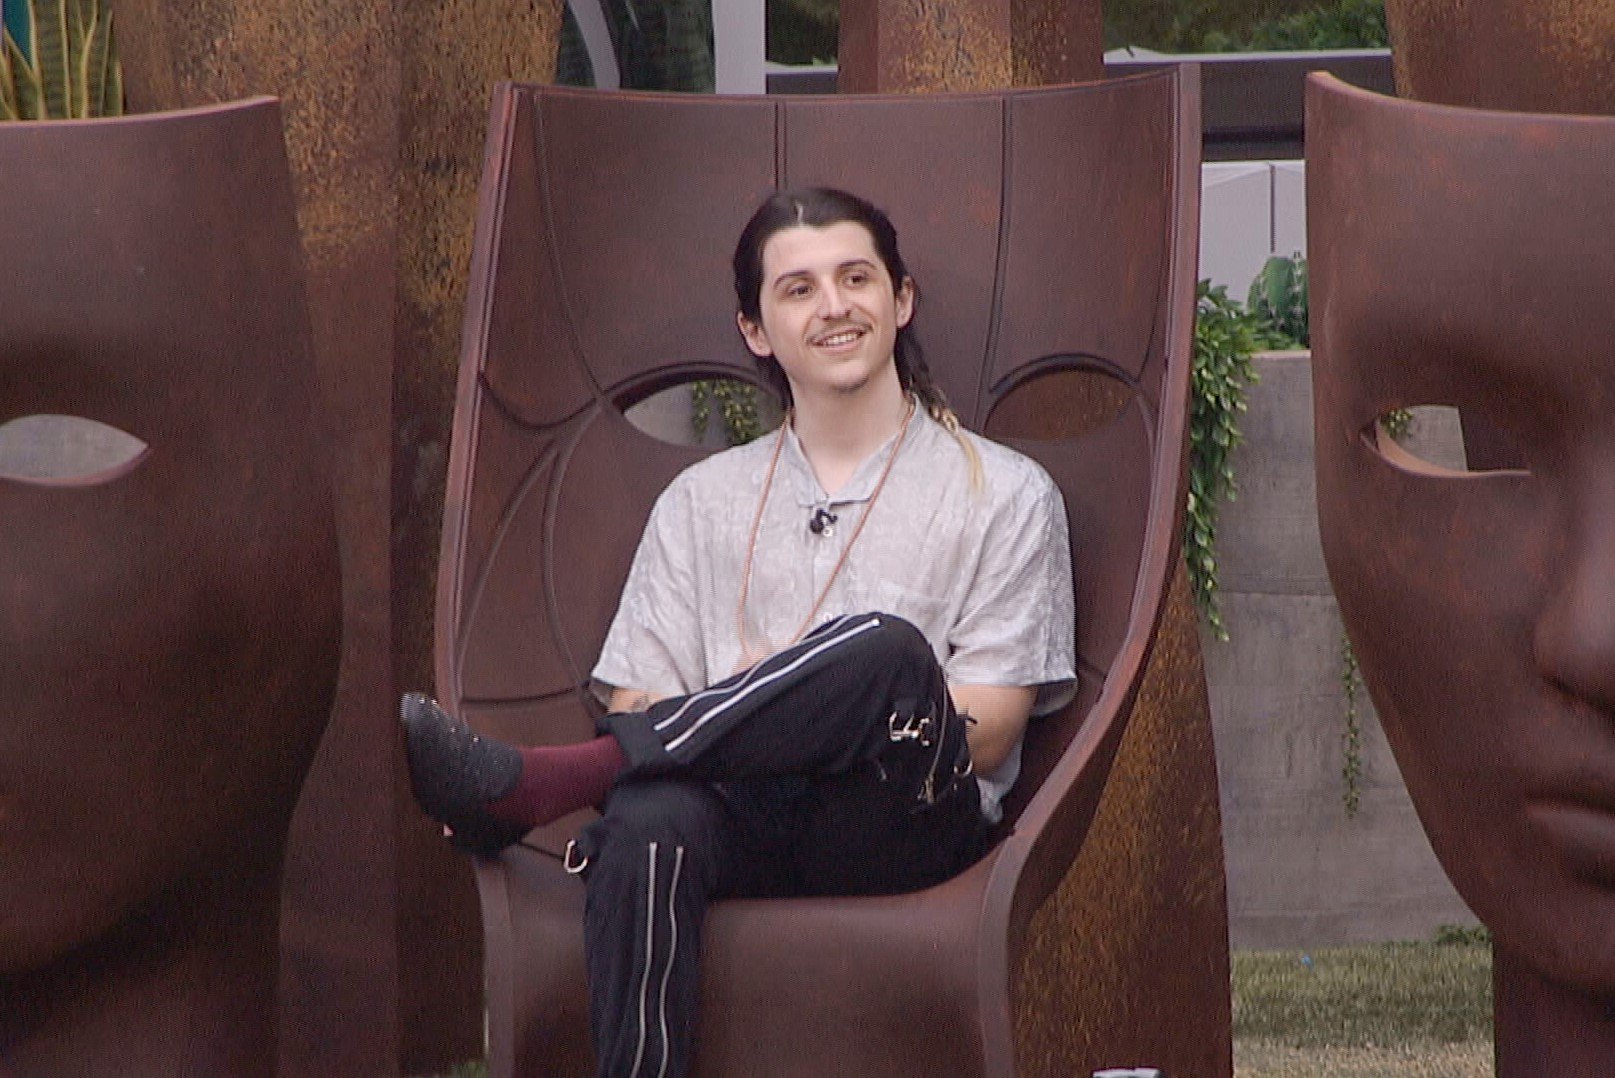 Matthew Turner, who stars in 'Big Brother 24' on CBS, sits in a tiki chair and wears a light gray shirt and black pants.